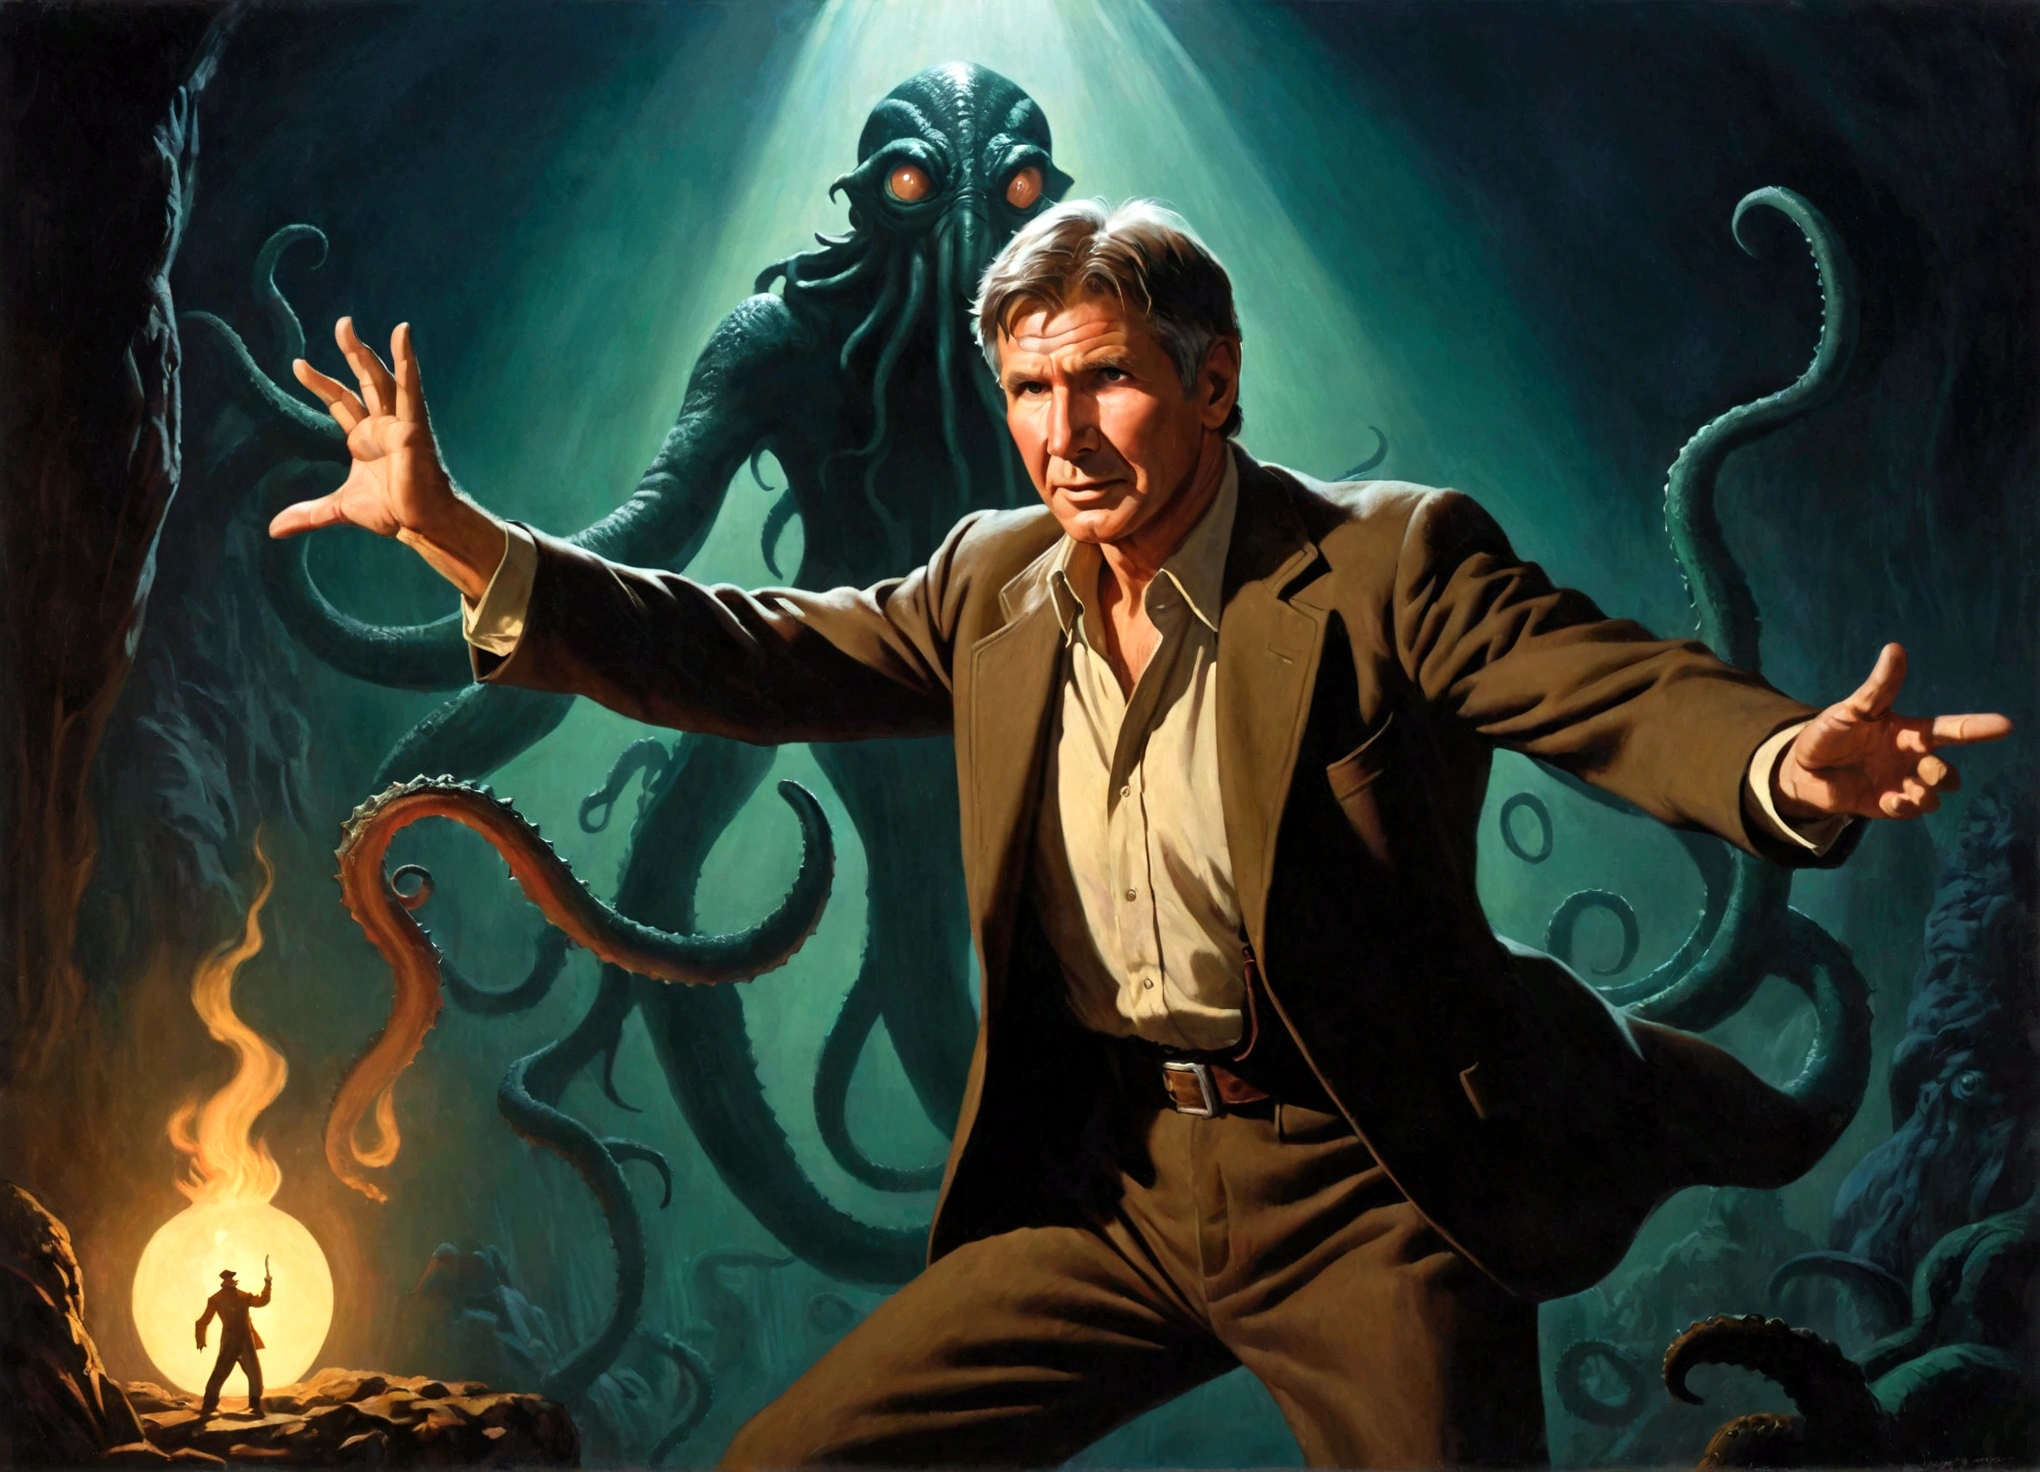 50s movie poster, Harrison Ford (age 30) adventurers gear dramatic pose, Cthulu and his dark shadow reaching for him